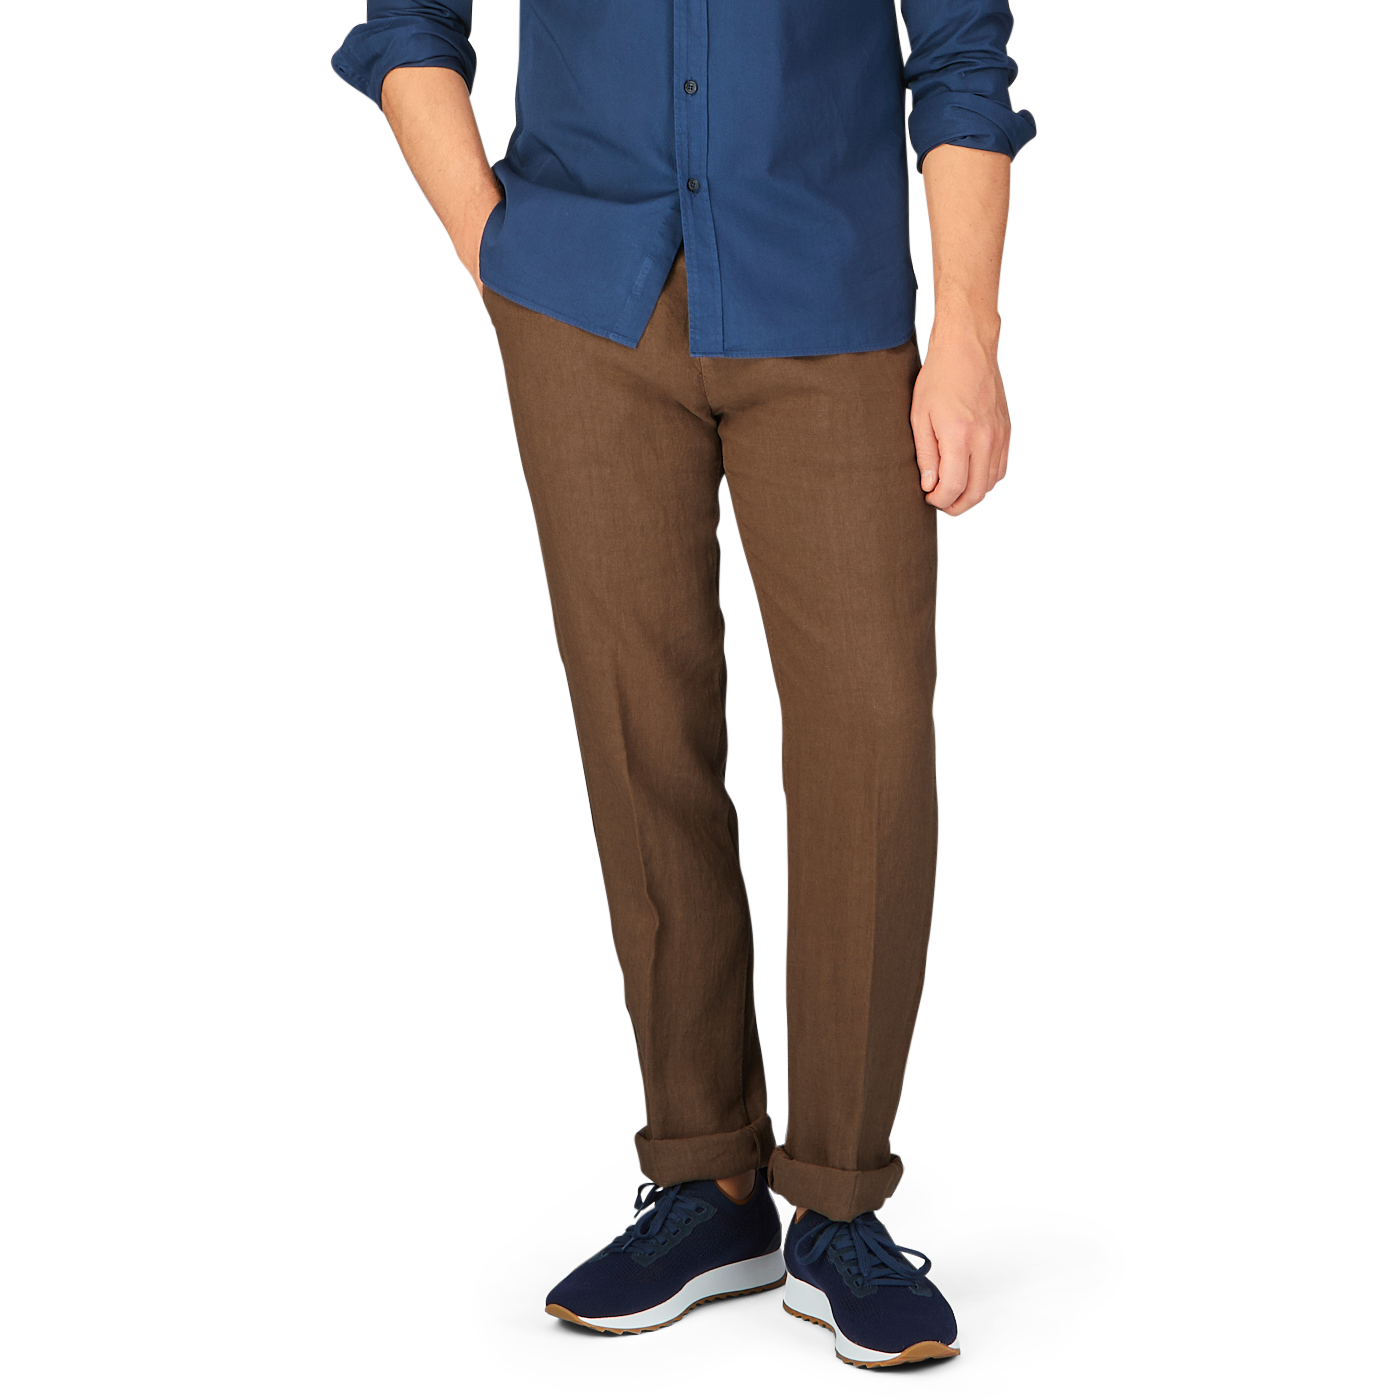 Lower body of a person dressed in Massimo Alba Light Brown Linen Casual Trousers made in Italy, and blue sneakers, with the upper body cropped out of the image.